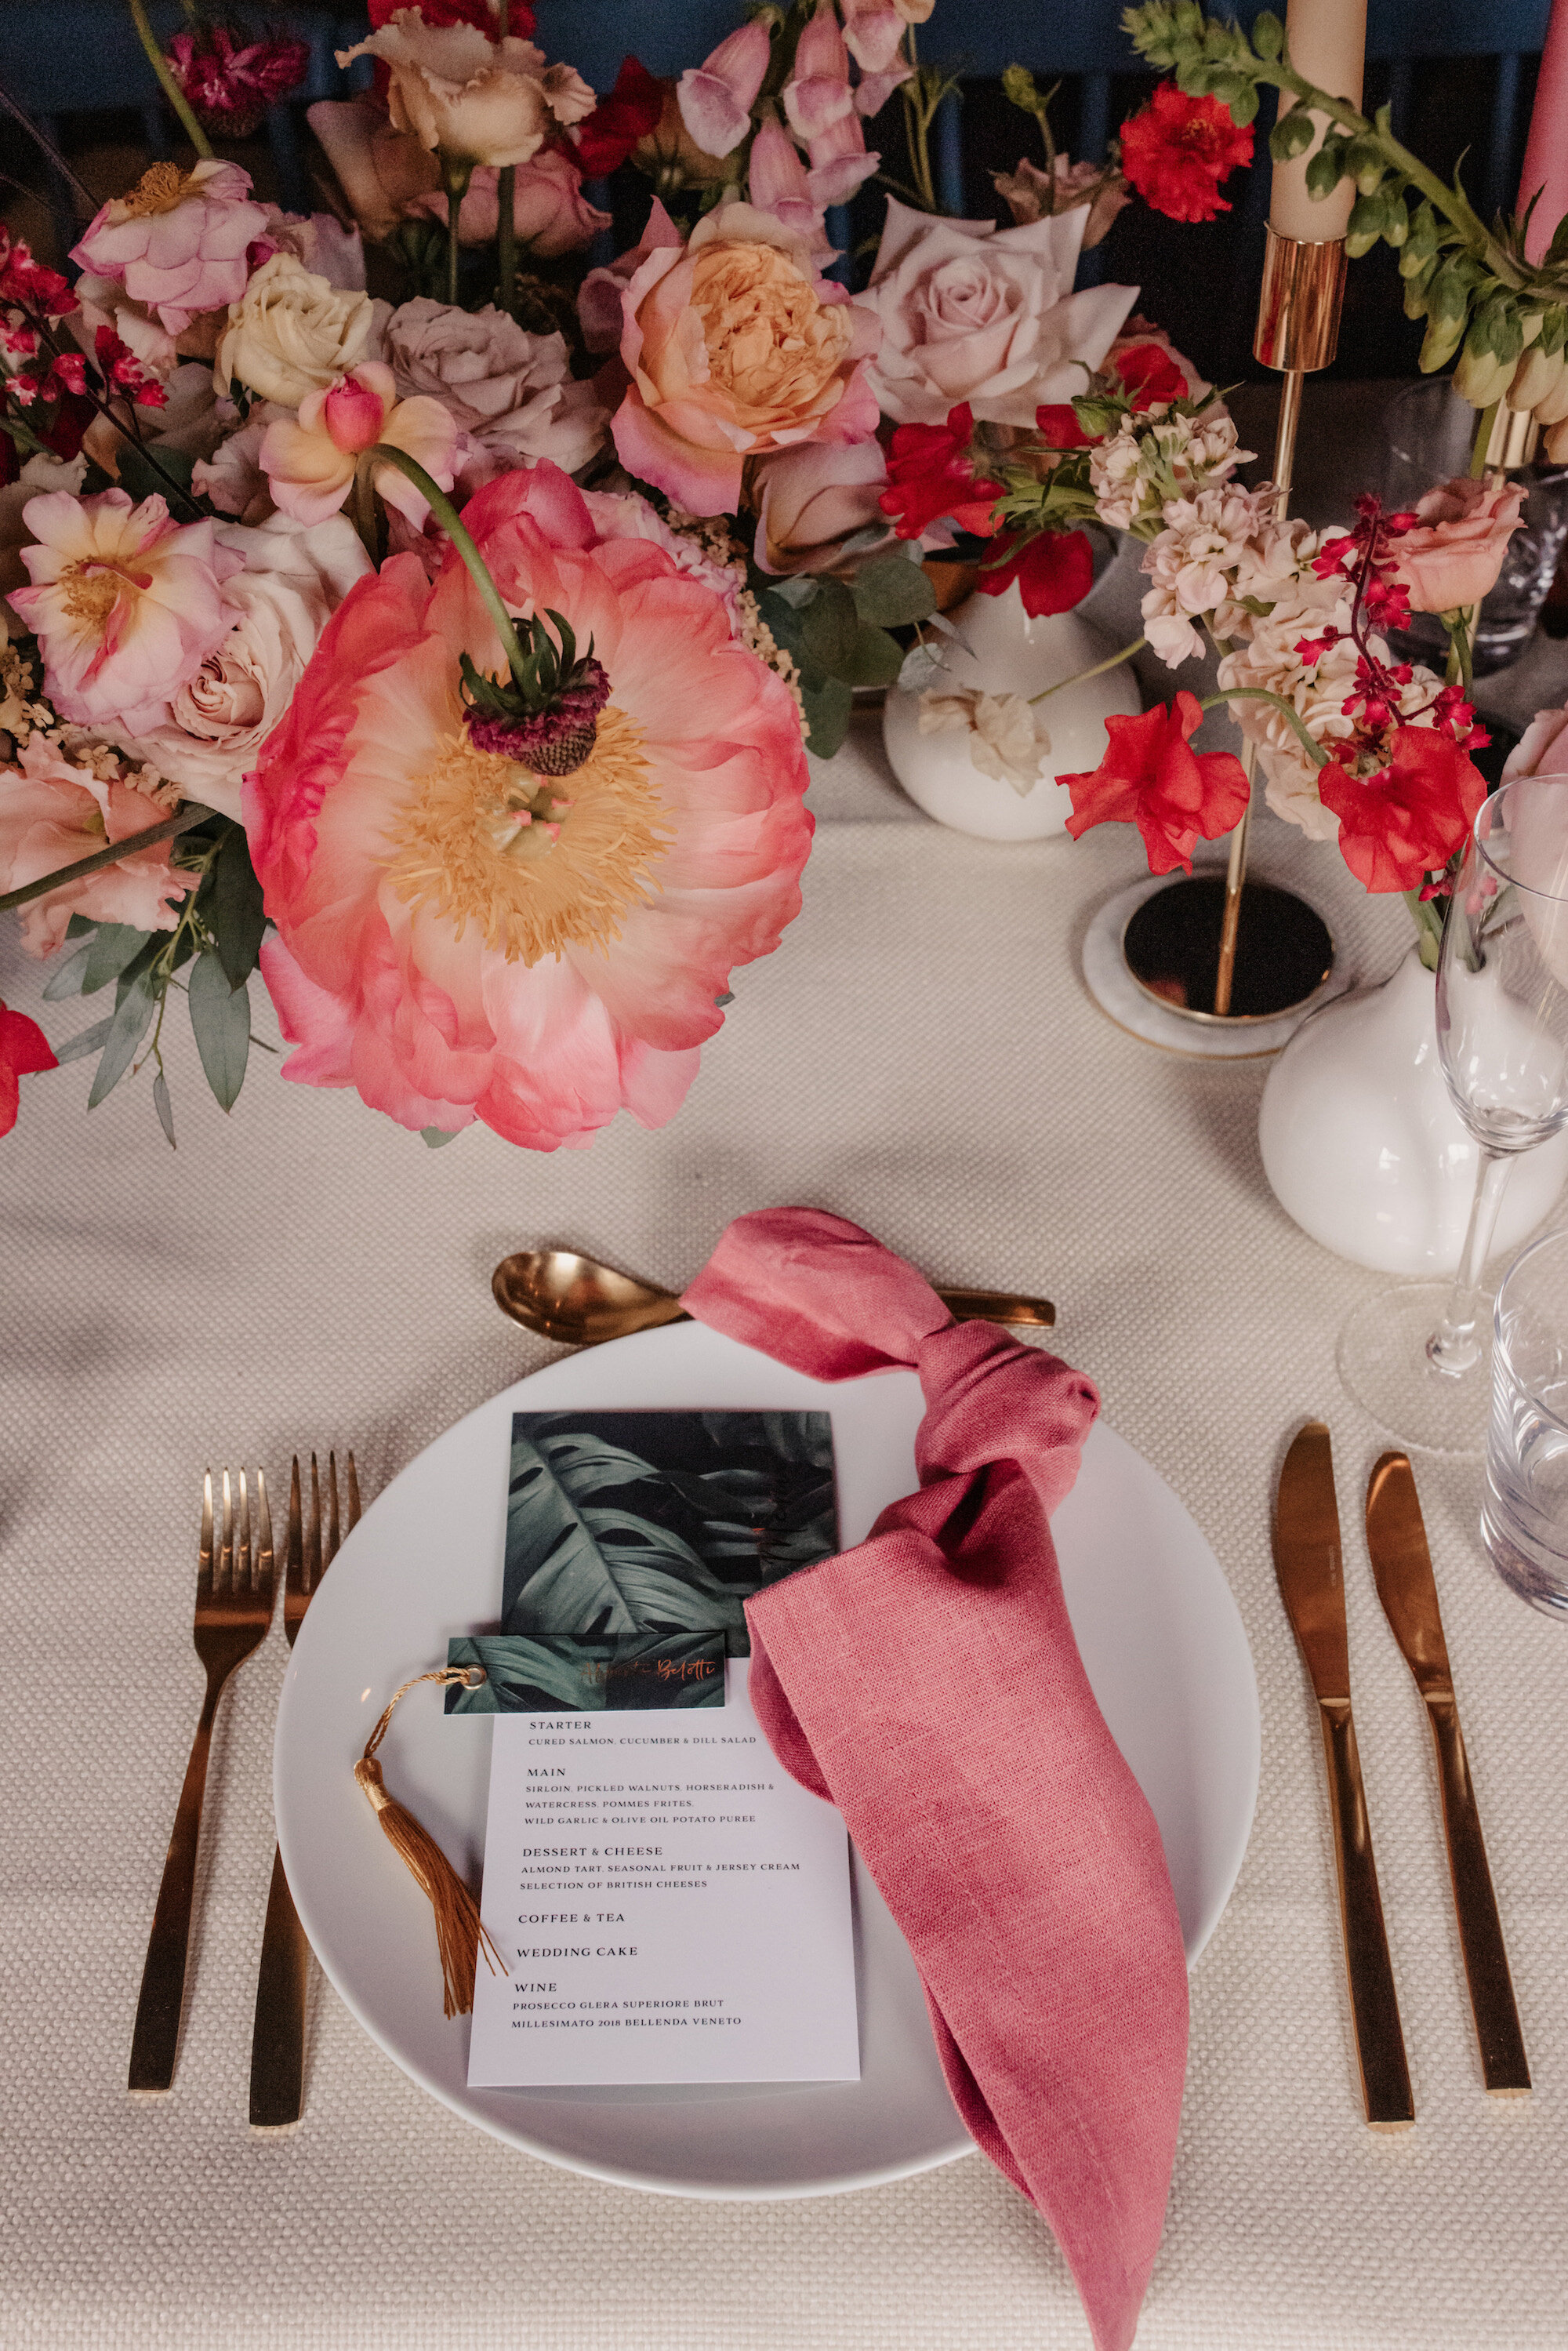 A colourful place setting of a London wedding with pink linen napkins, gold cutlery, and red and blush centrepieces